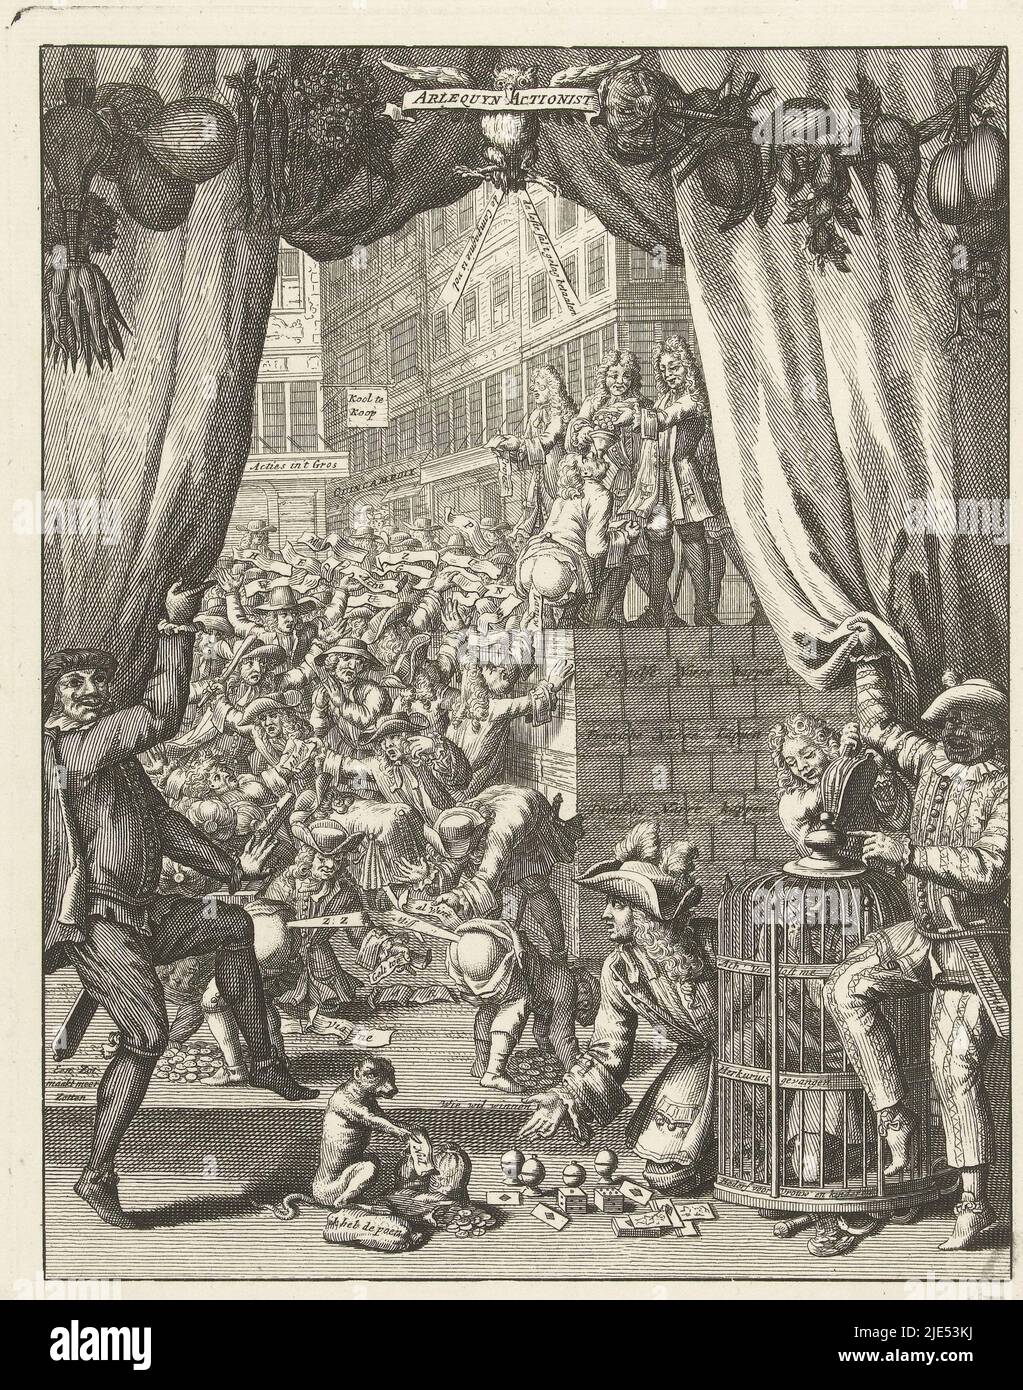 Cartoon on the actionists. The harlequin Bombario and a fool lift a curtain revealing the action trade at the coffee house Quincampoix, where a large crowd of action merchants crowd around the actions shouted out from a stage. In the foreground Mercury trapped in a cage. Also used as a title plate in the eponymous comedy by Pieter Langendijk from 1720. Print 12 in the series Het Groote Tafereel der Dwaasheid with cartoons on the Windhandel of Actionhandel of 1720, Harlequin Actionist, 1720 Arlequyn Actionist, Het Groote Tafereel der Dwaasheid (title series)., print maker: anonymous, Northern Stock Photo